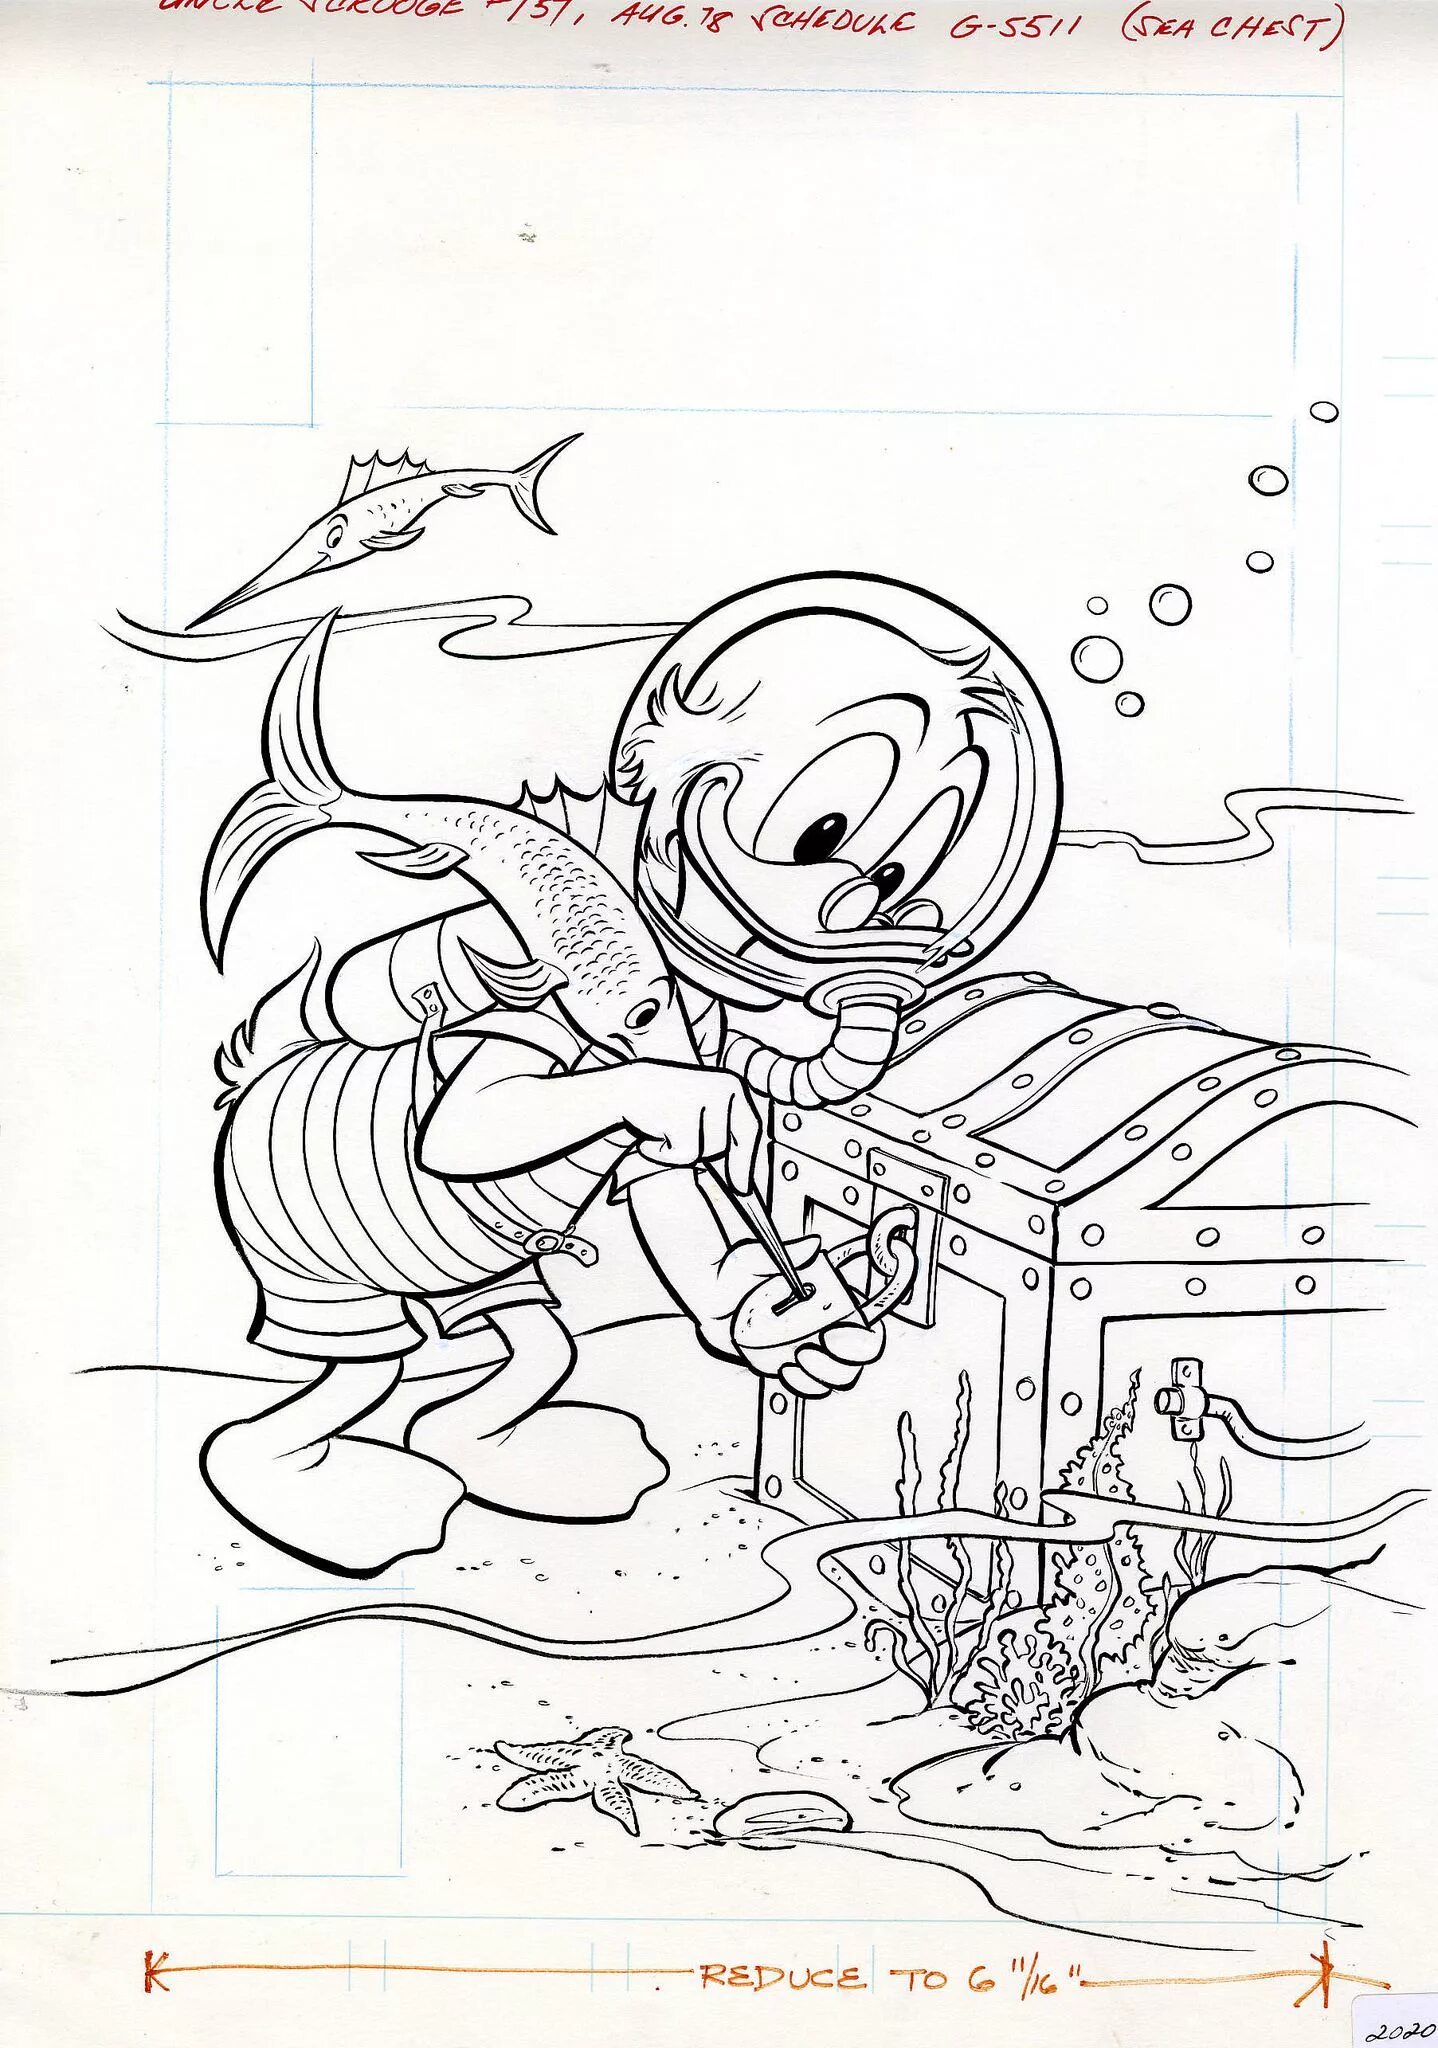 Pompous scrooge mcduck coloring pages with money